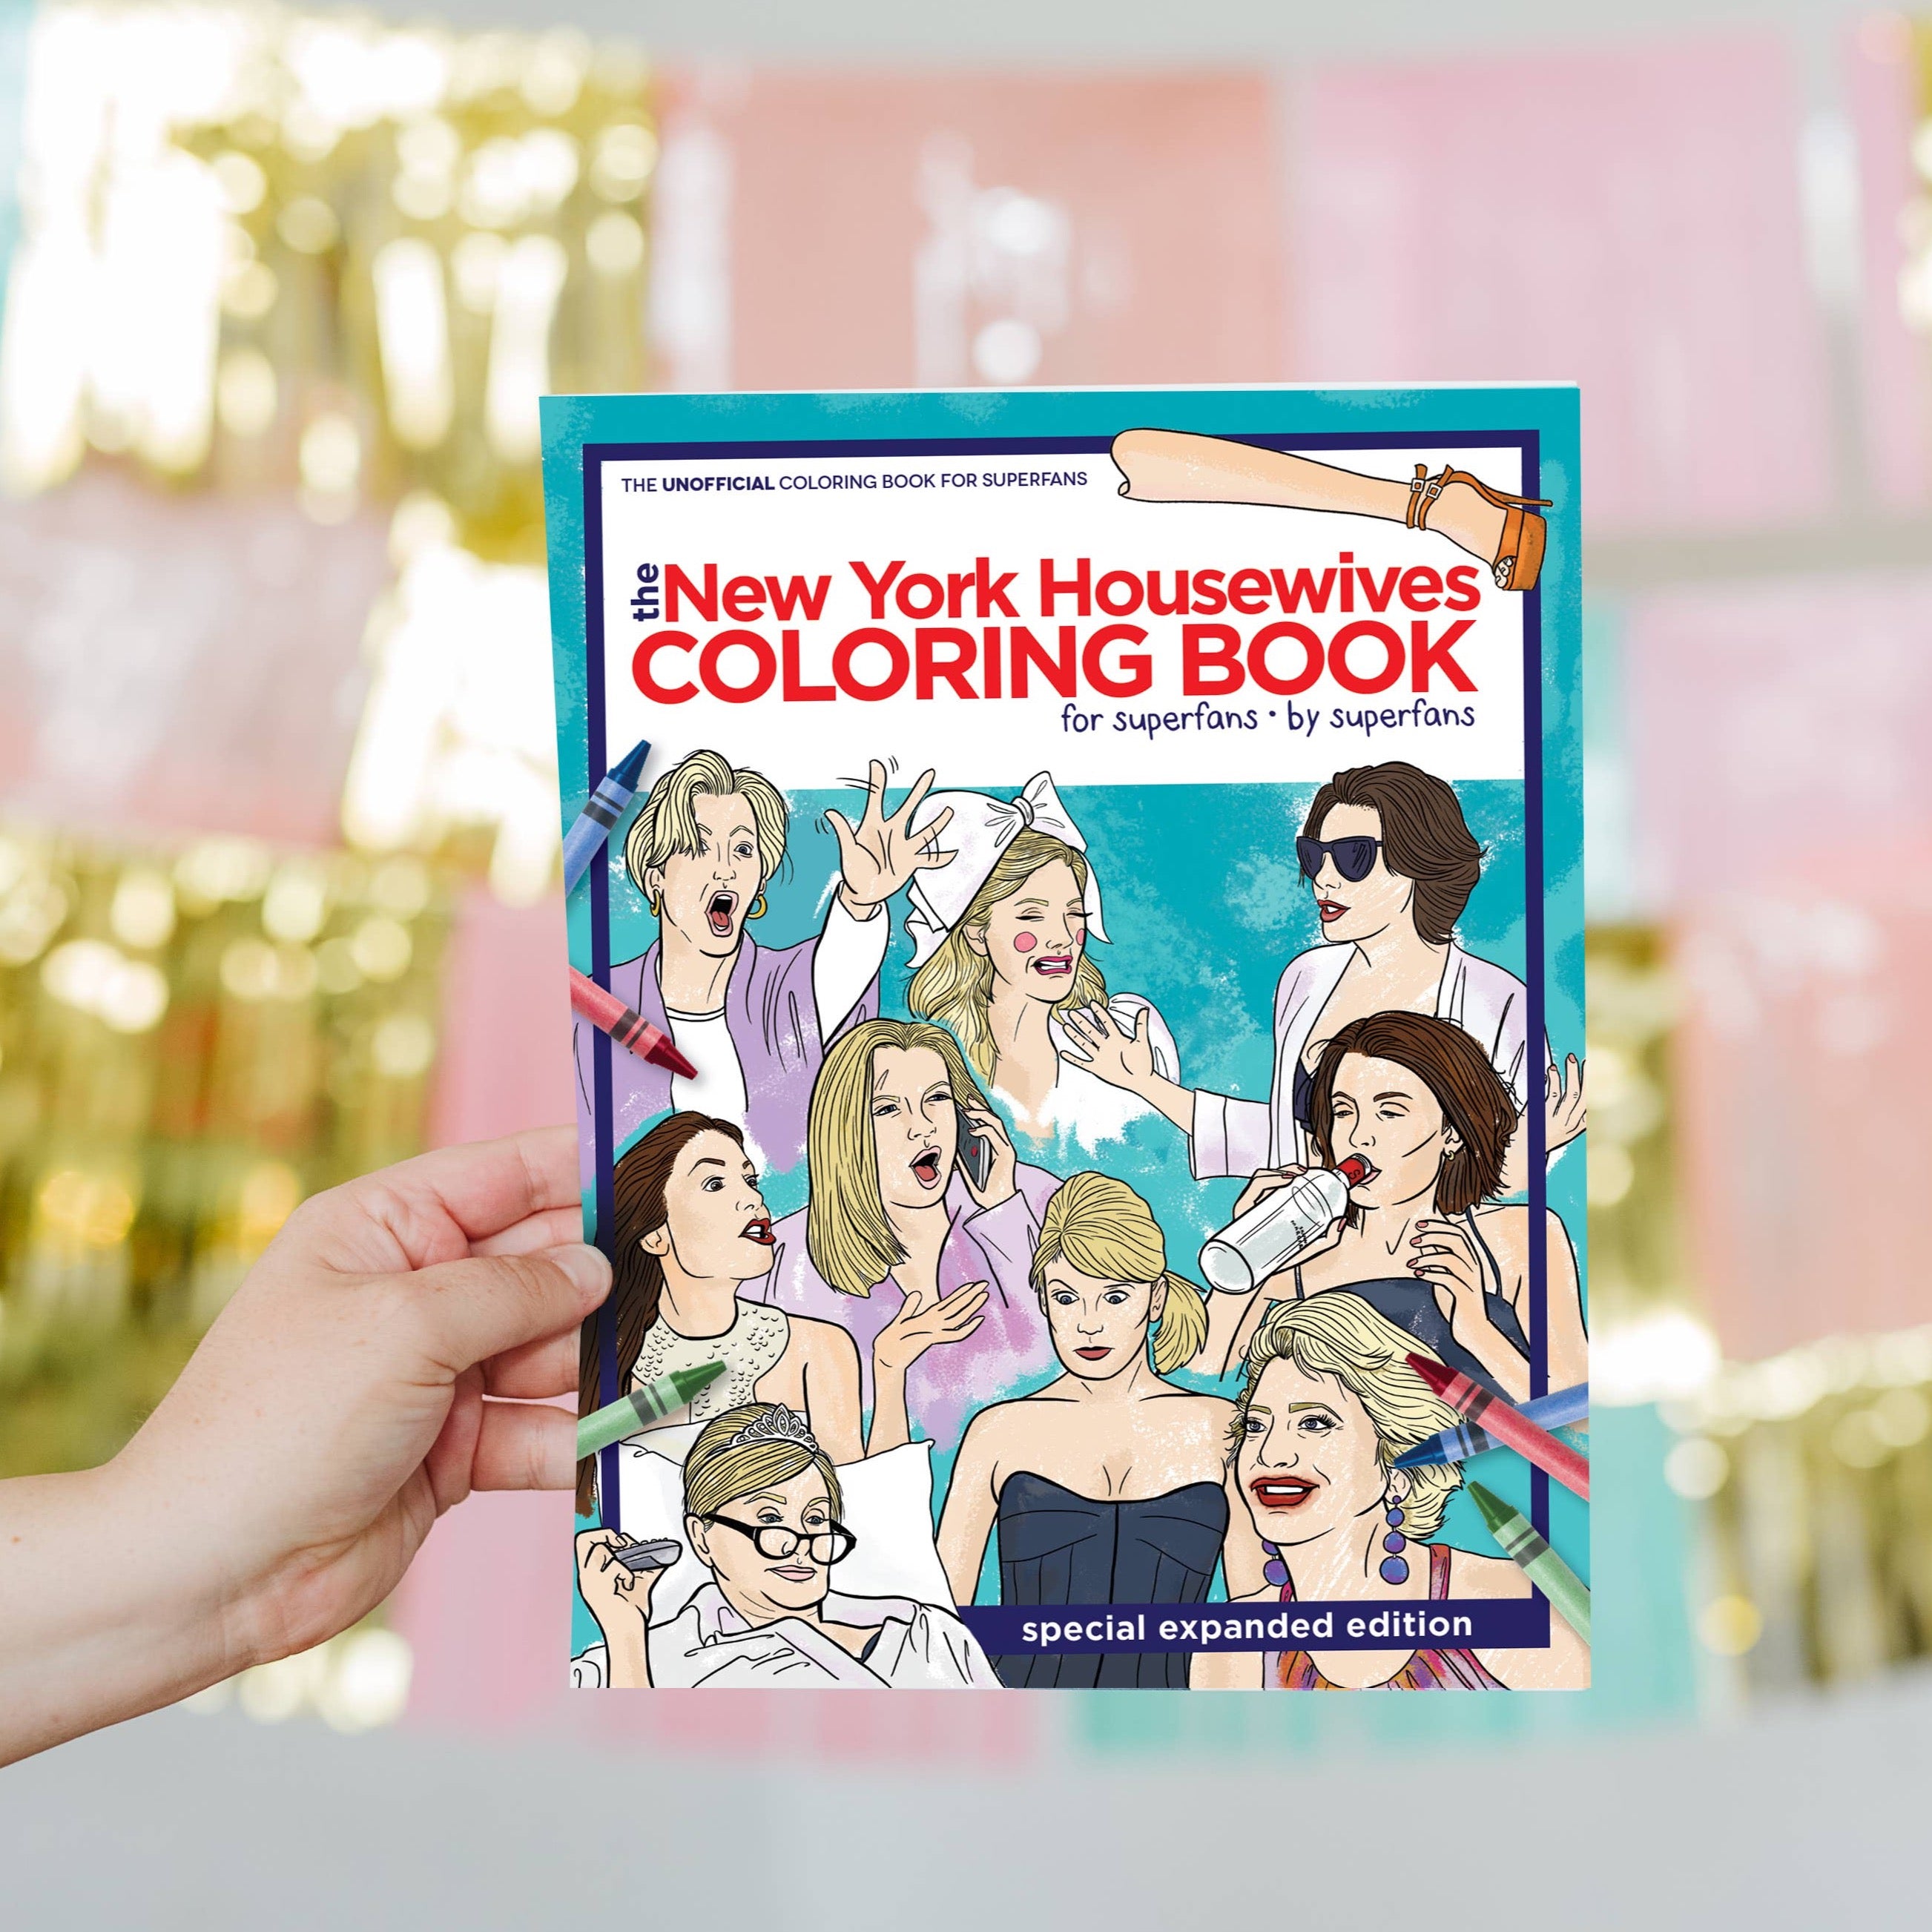 Coloring Book, RHONY - Danshire Market and Design, coloring book for Bravo TV show RHONY